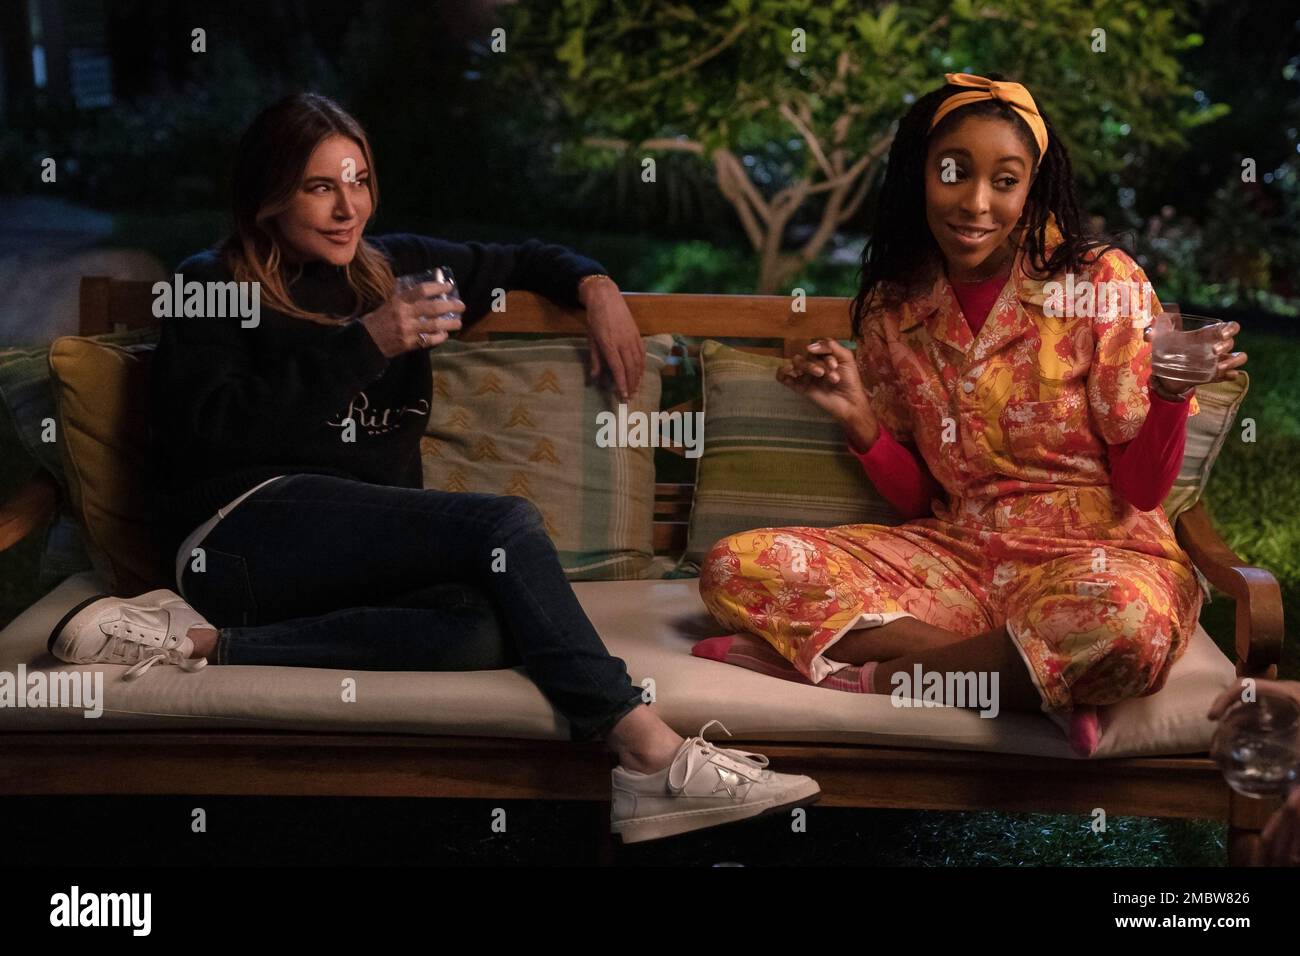 CHRISTA MILLER and JESSICA WILLIAMS in SHRINKING (2023), directed by JAMES PONSOLDT. Credit: WARNER BROS. TELEVISION / Album Stock Photo